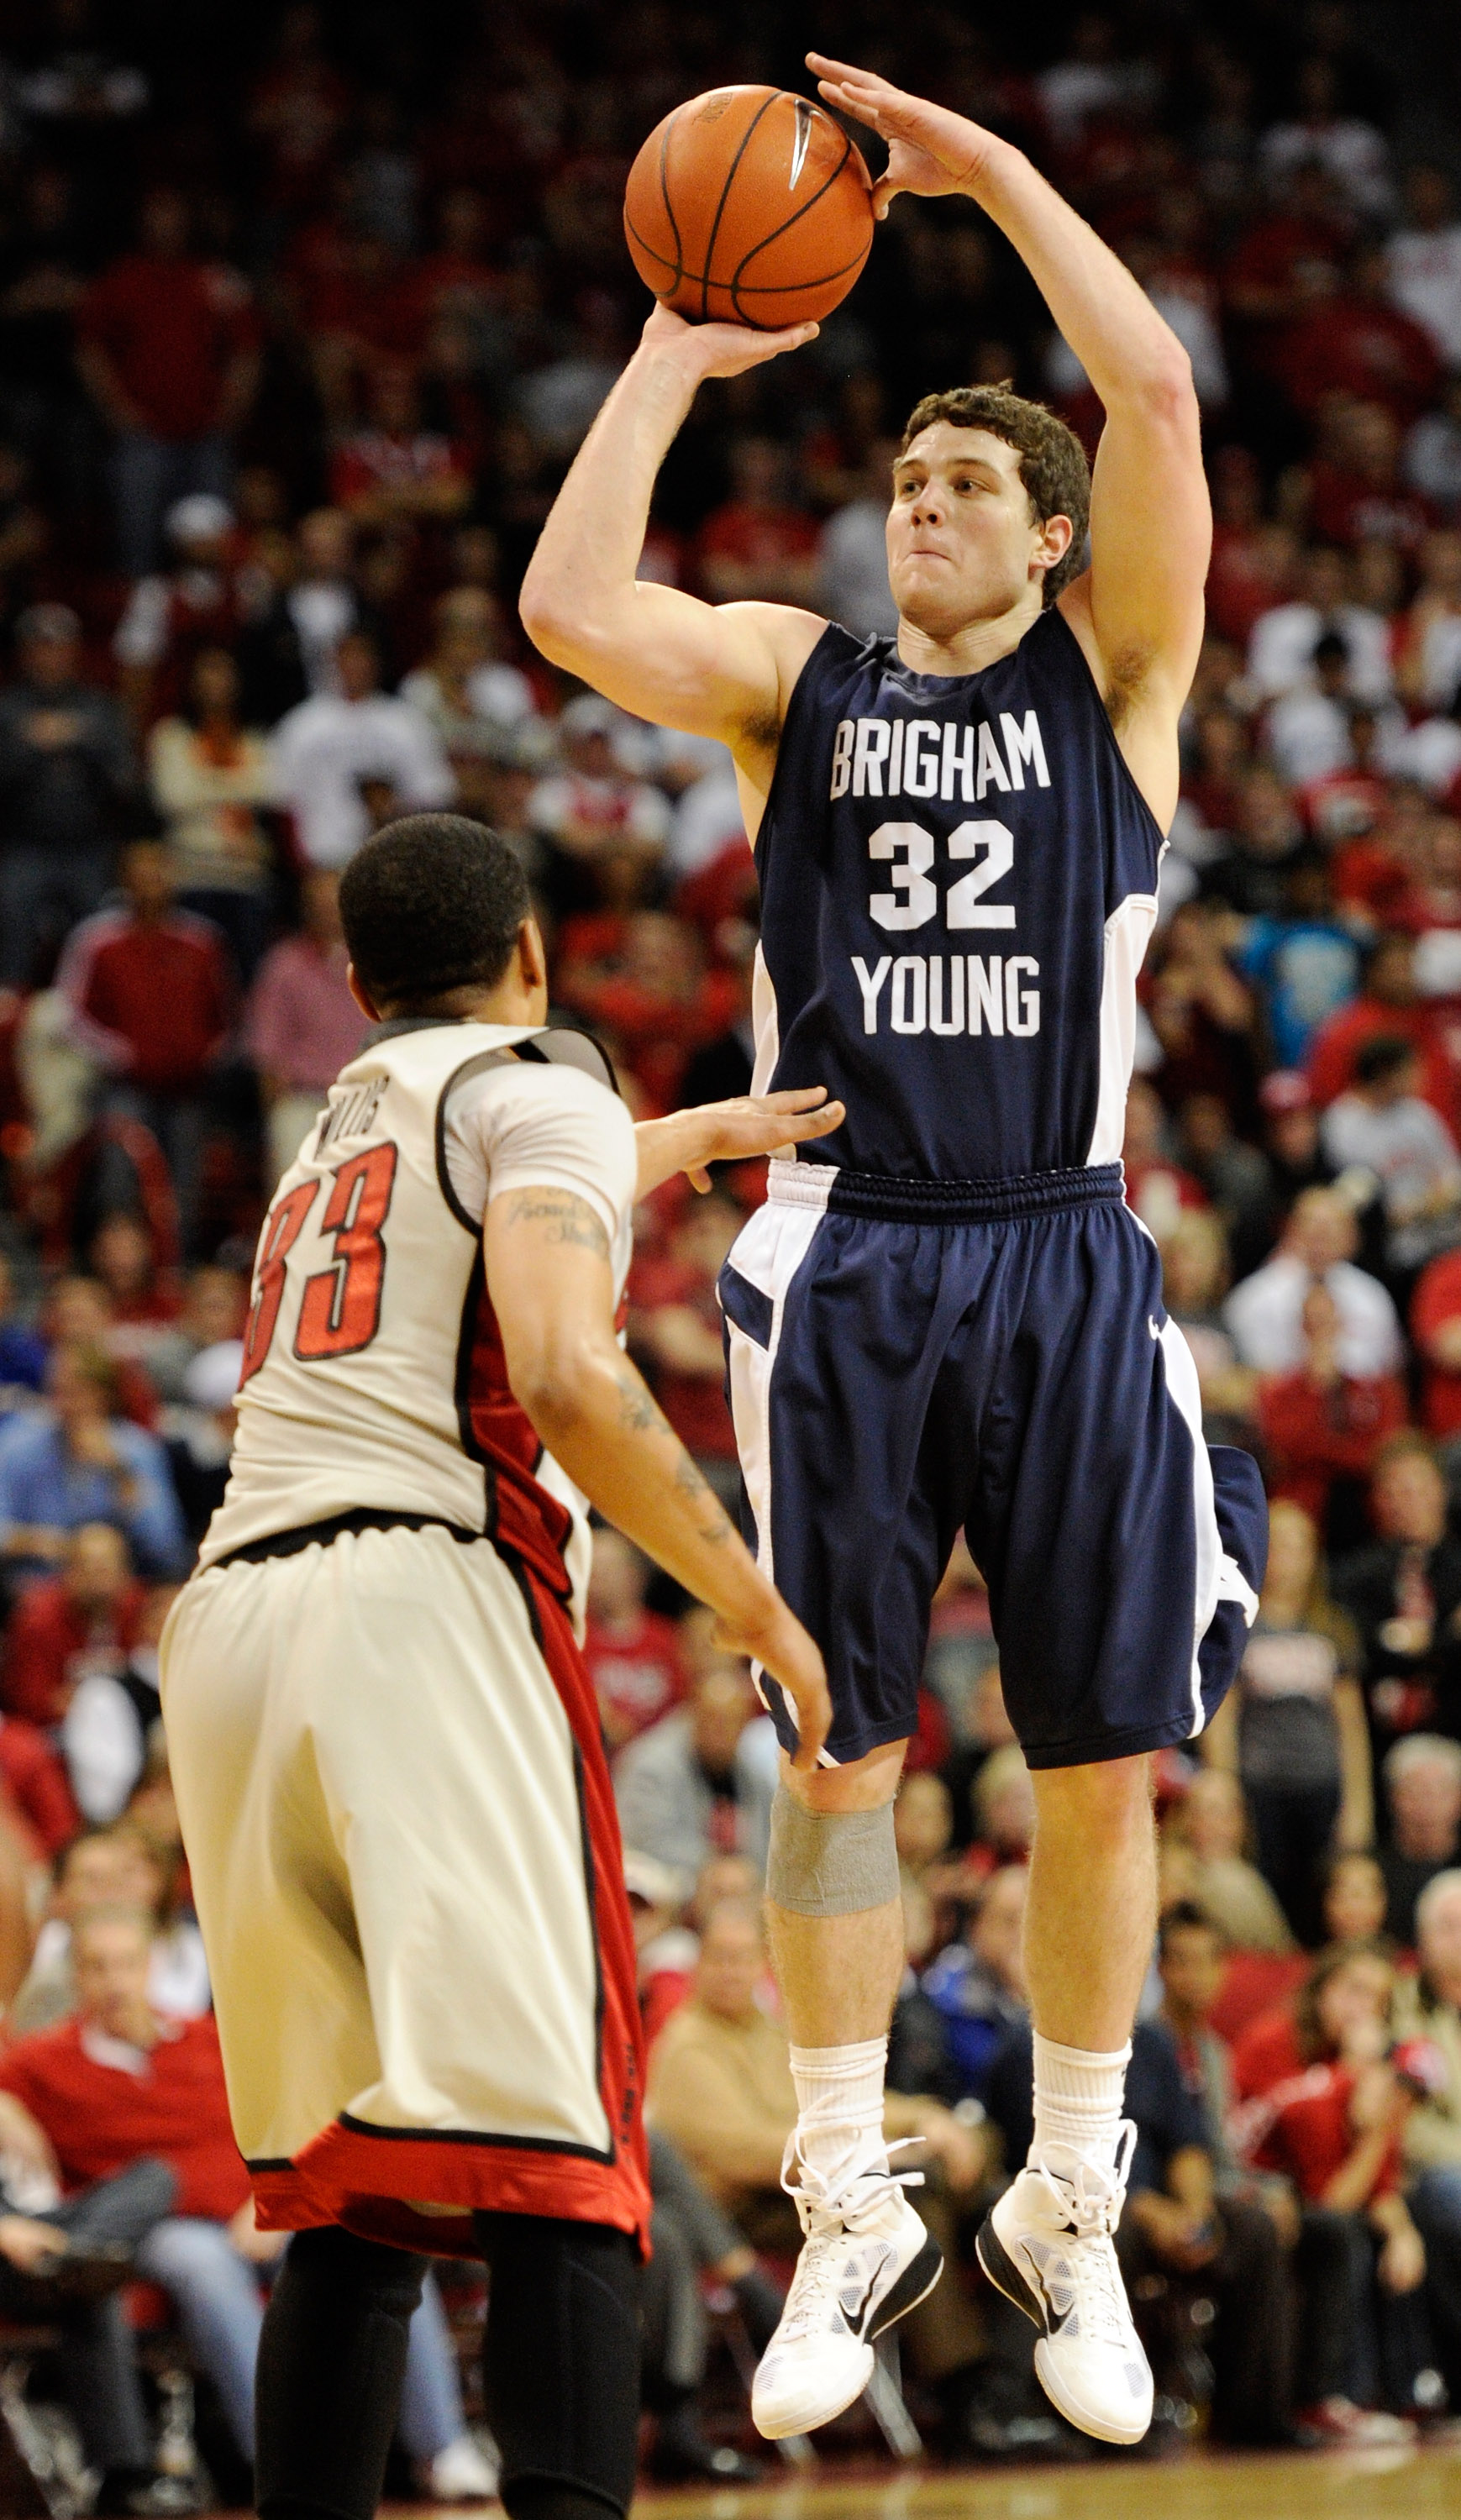 LAS VEGAS, NV - JANUARY 05:  Jimmer Fredette #32 of the Brigham Young University Cougars shoots over Tre'Von Willis #33 of the UNLV Rebels during their game at the Thomas & Mack Center January 5, 2011 in Las Vegas, Nevada. BYU won 89-77.  (Photo by Ethan